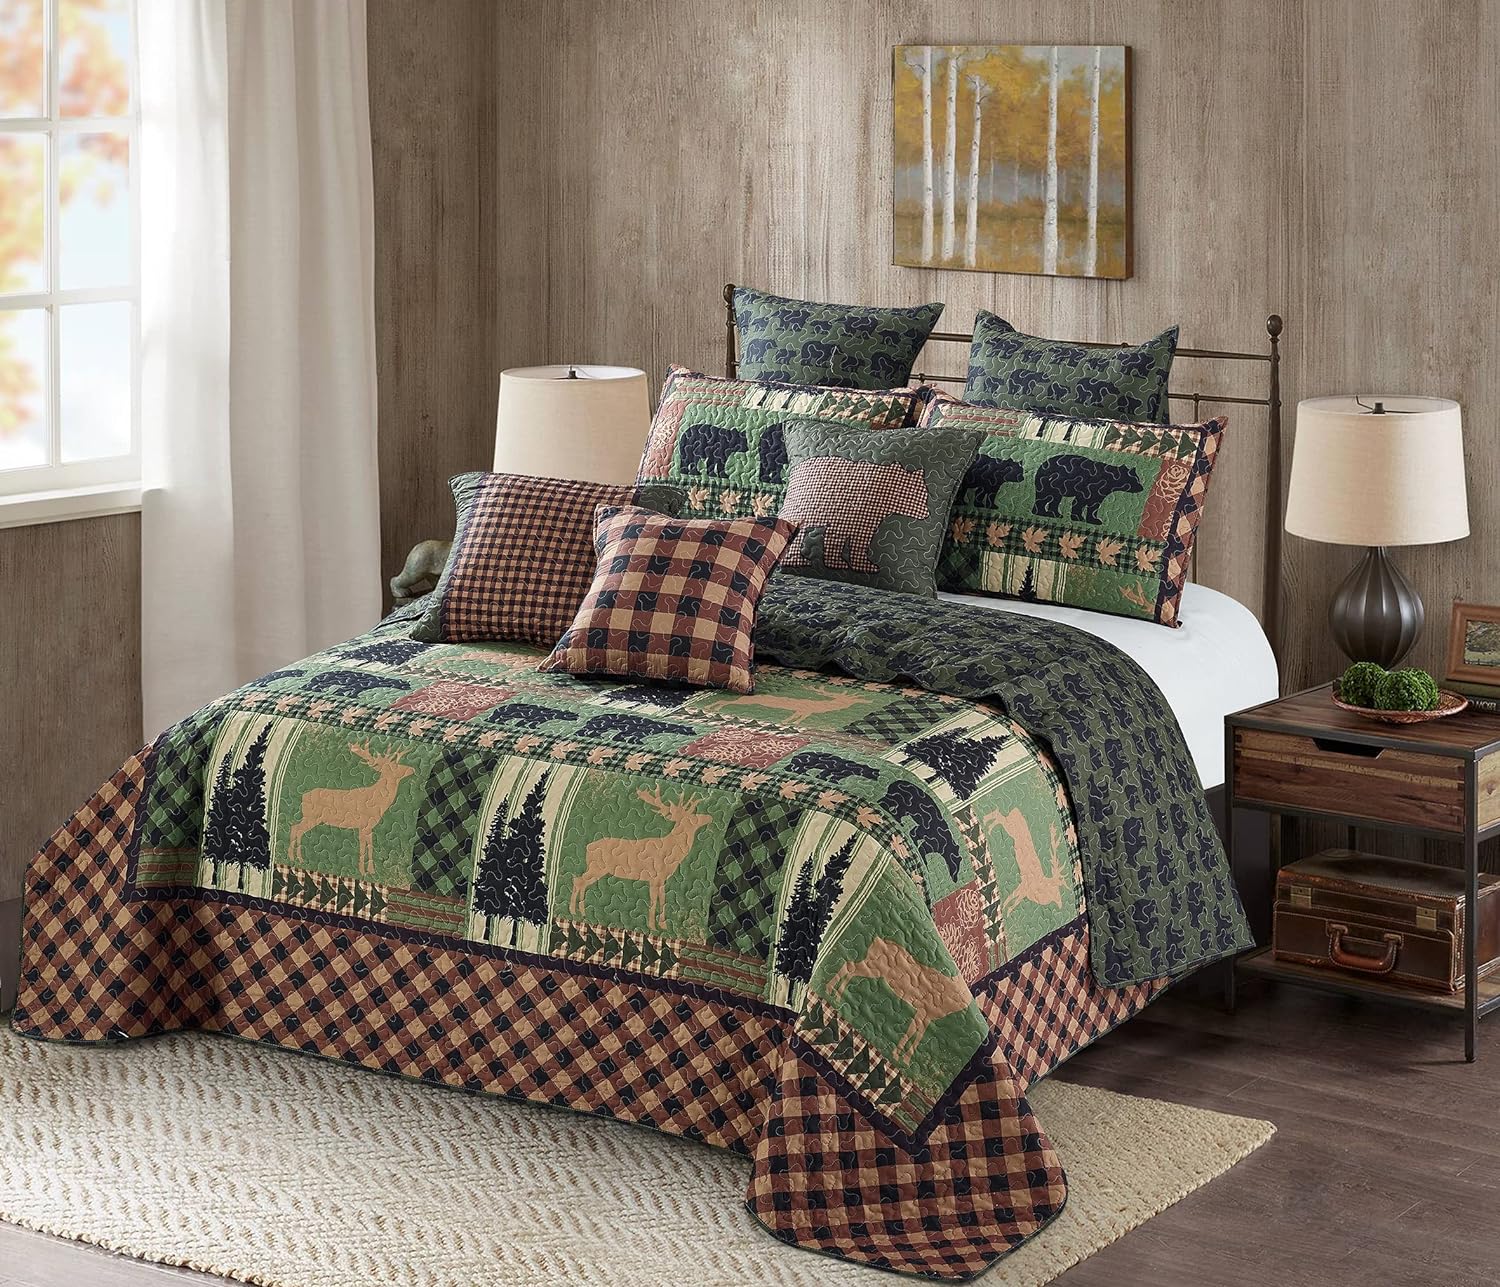 Virah Bella 3 Piece King Cabin Quilt Bedding Set - Autumn Forest - Rustic Country Reversible Patchwork Comforter Set with Decorative Pillow Shams